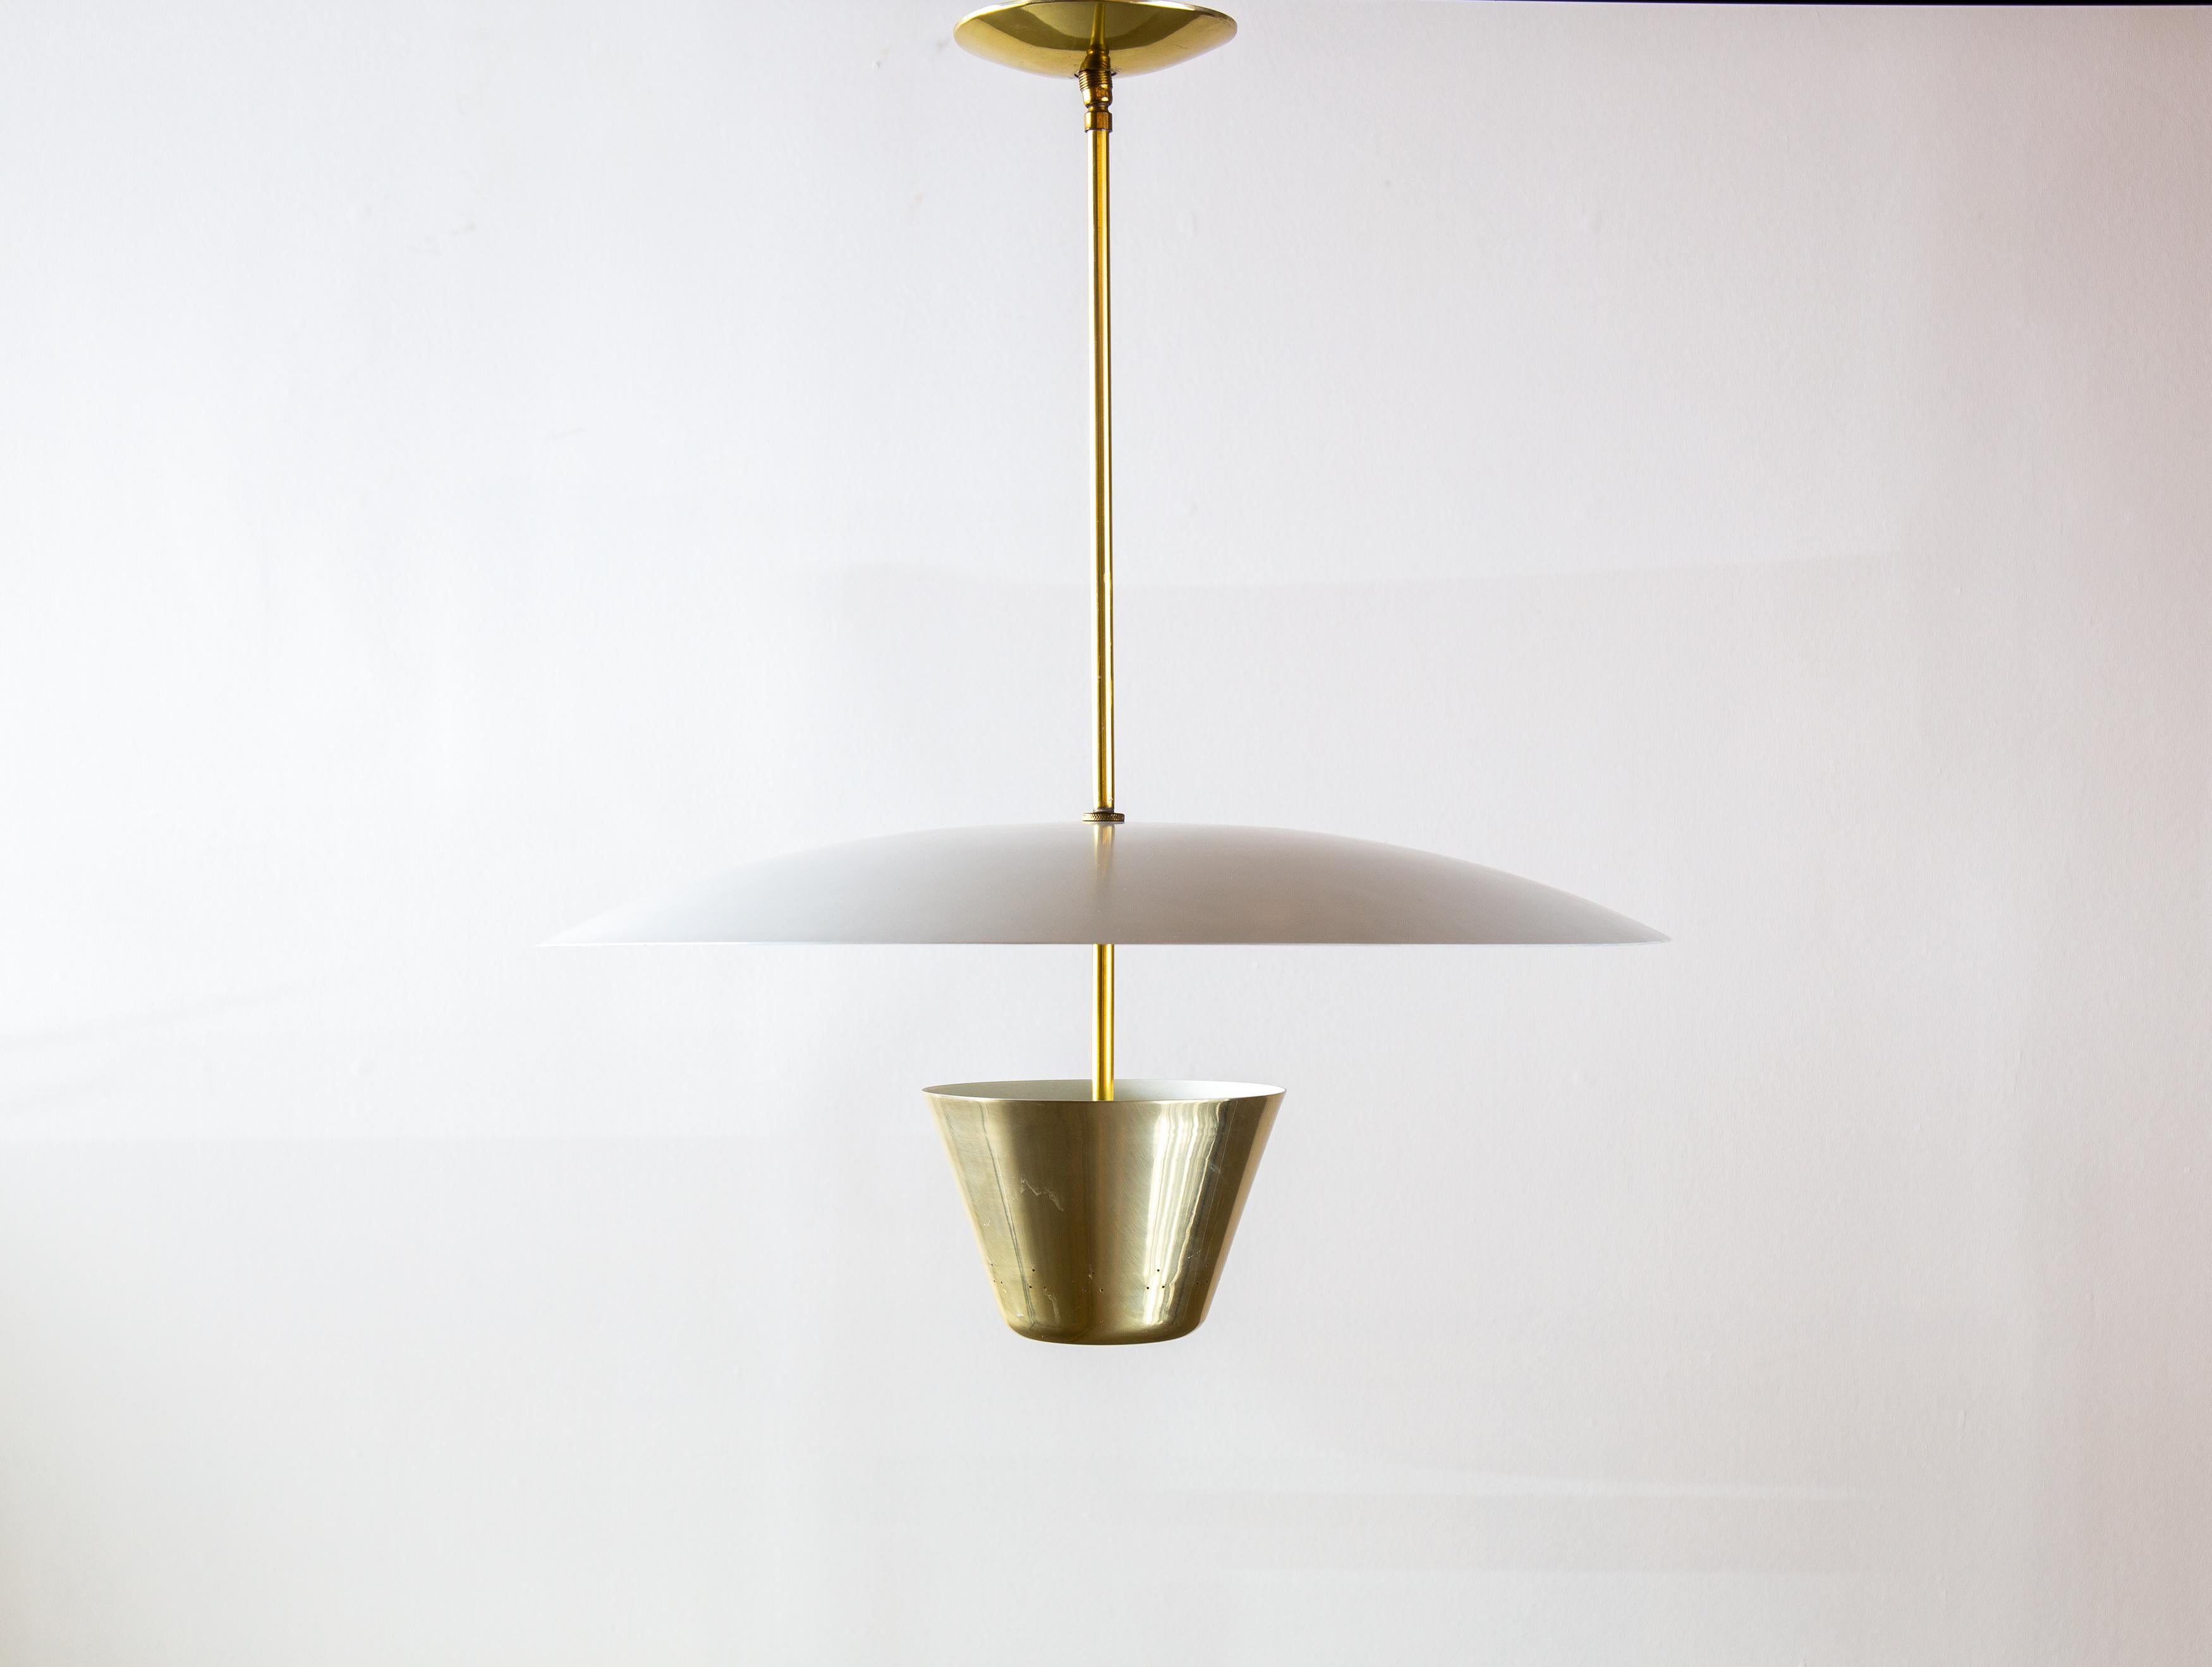 A simplistic form from Edward Wormley for lightolier.  The white cup allows for light to diffuse through perforations as well as directs light up which bounces and diffuses off the large shade to cast a nice soft light.  Seemingly floating in air as